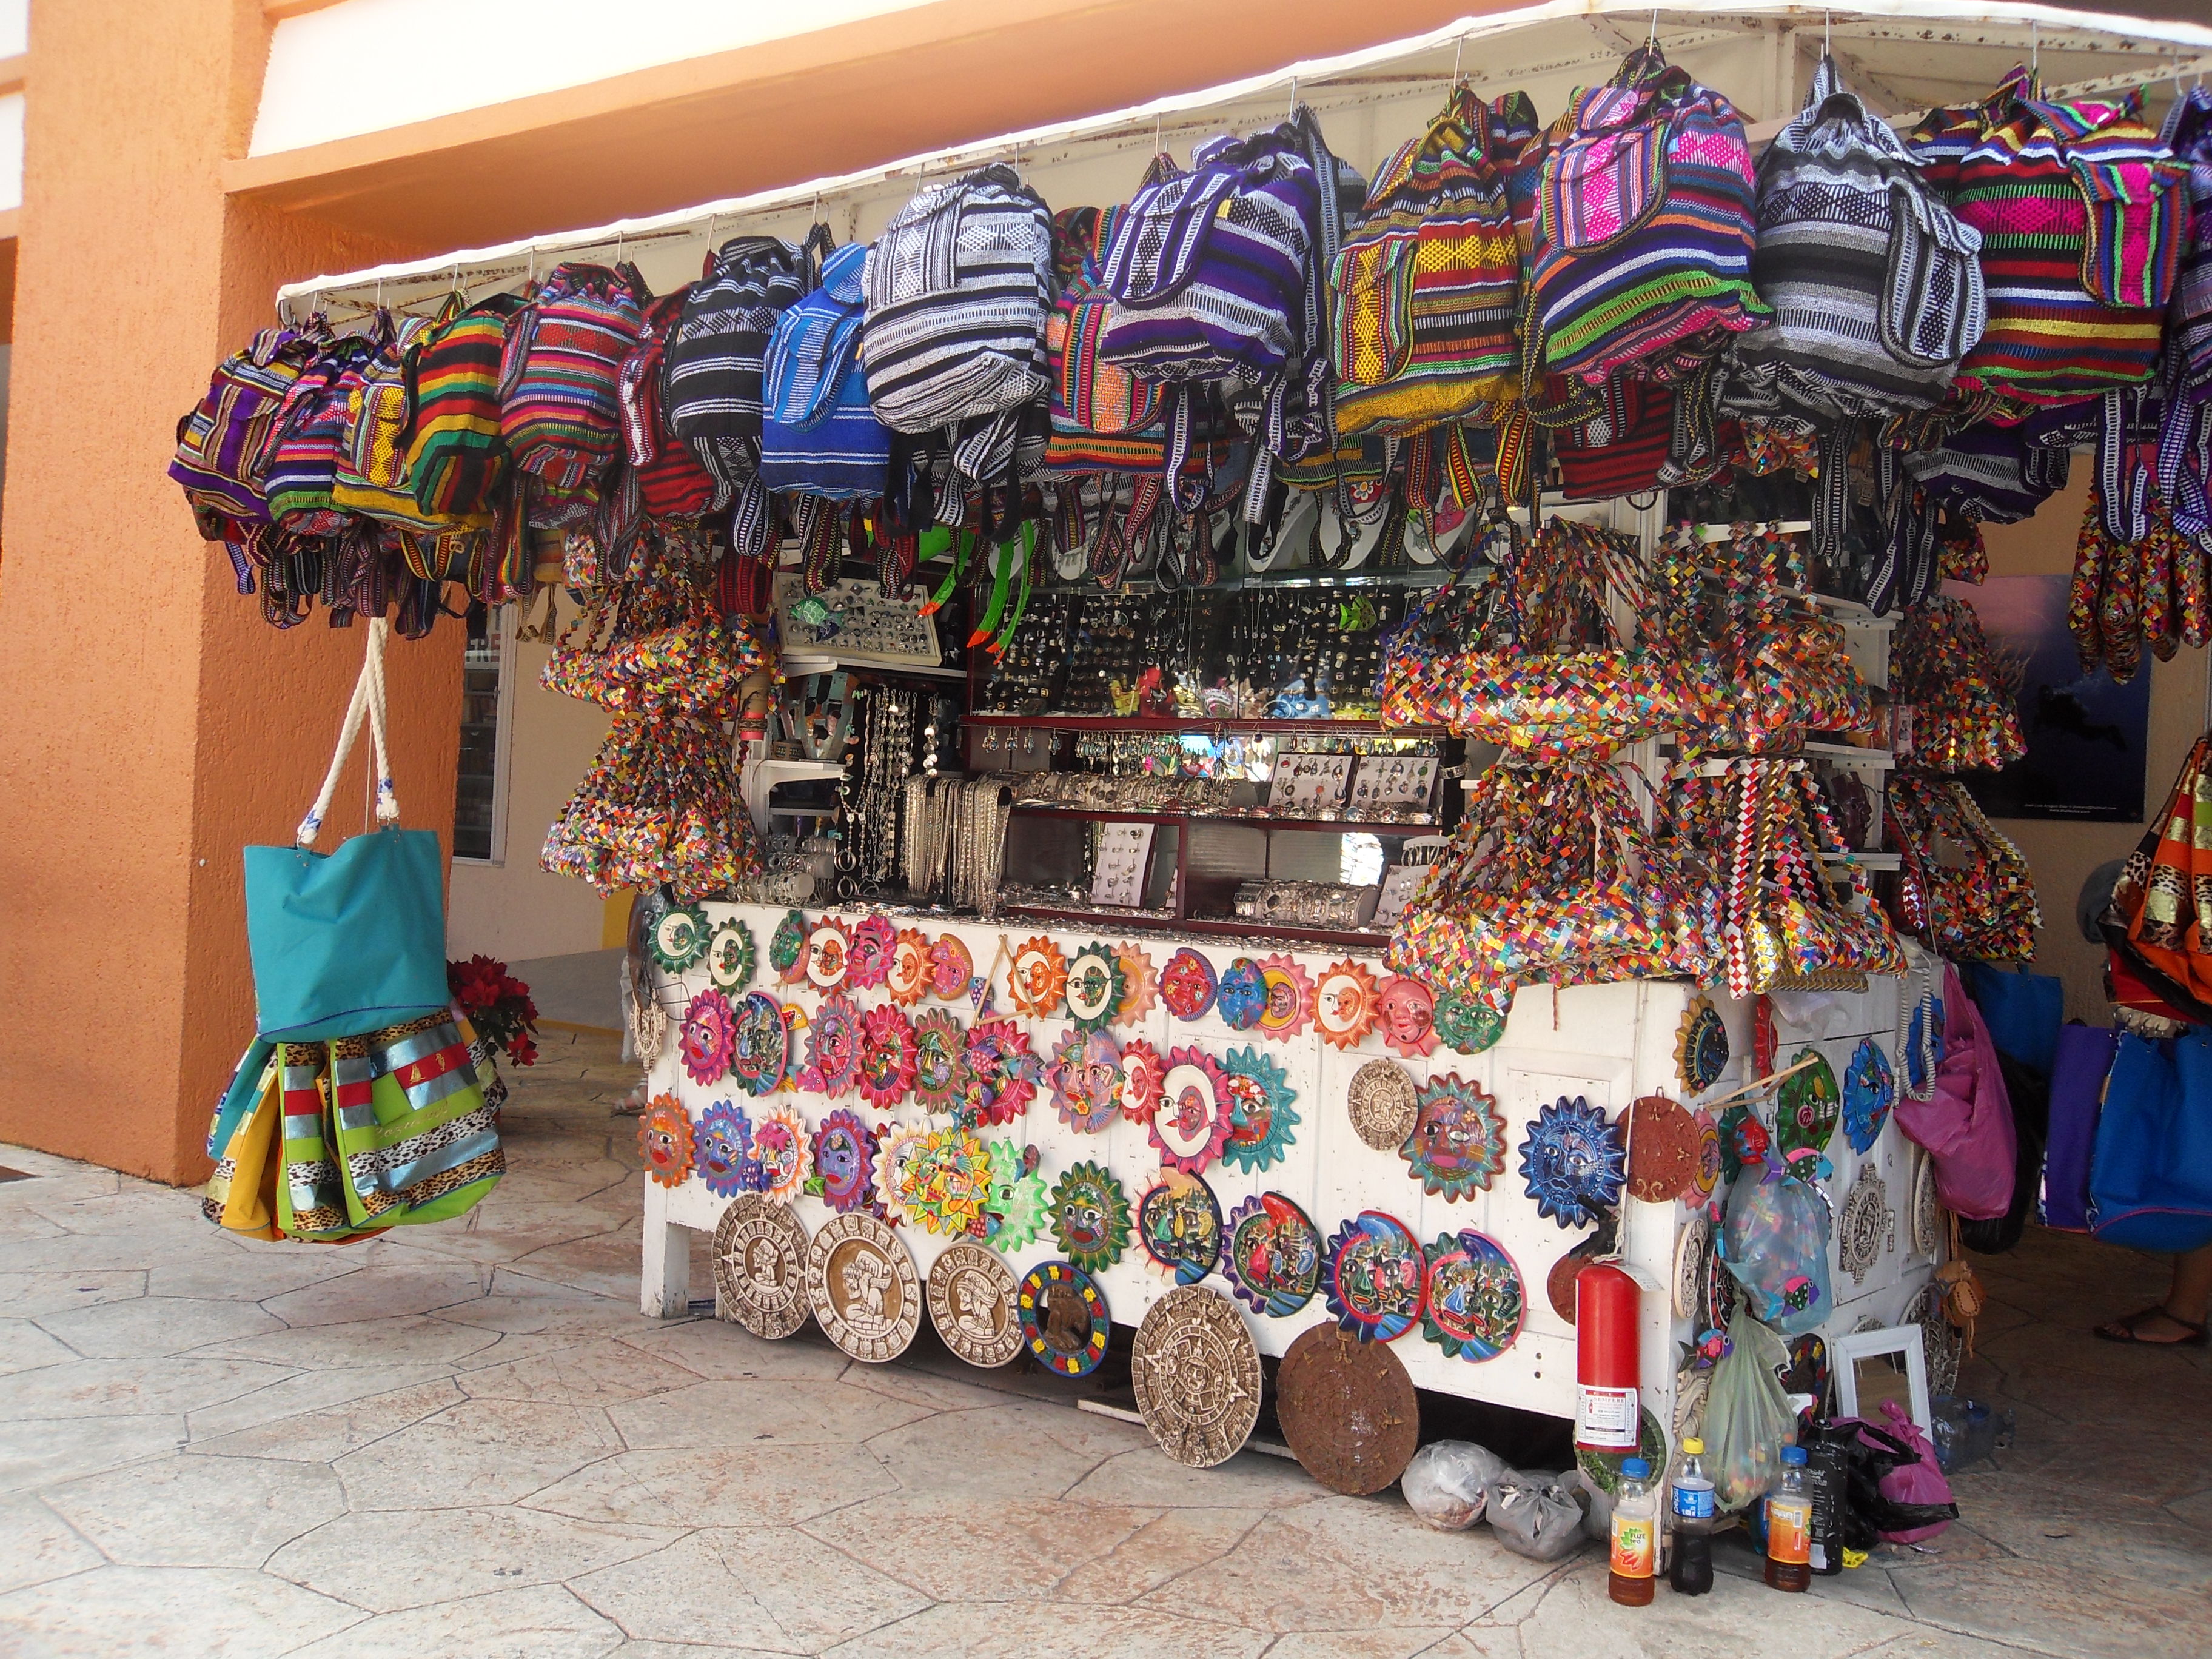 SHOPS AT COZUMEL, MEXICO